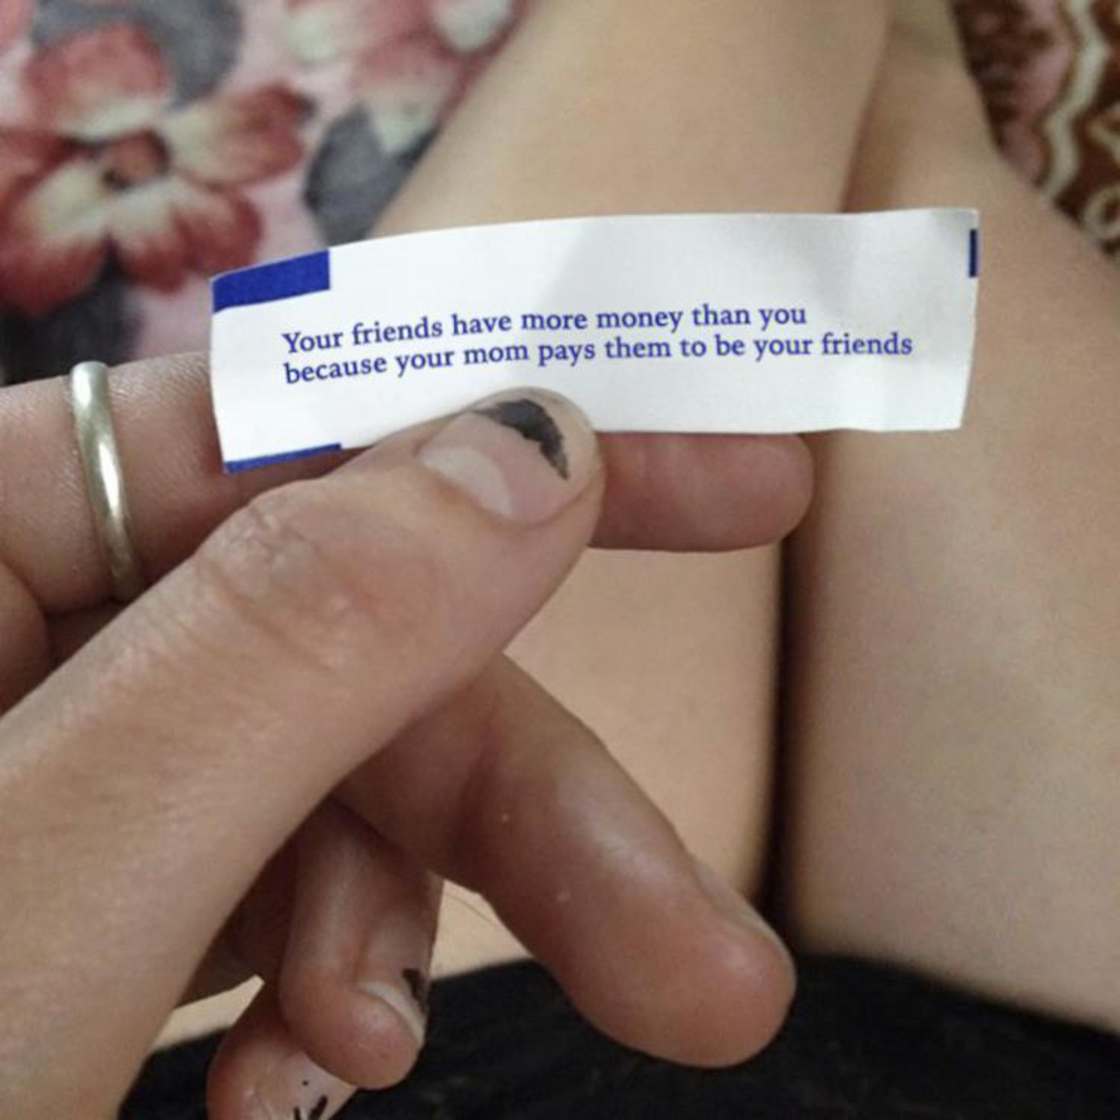 Fortune cookie telling you that your friends all have more money than you because your mom paid them to be your friend.